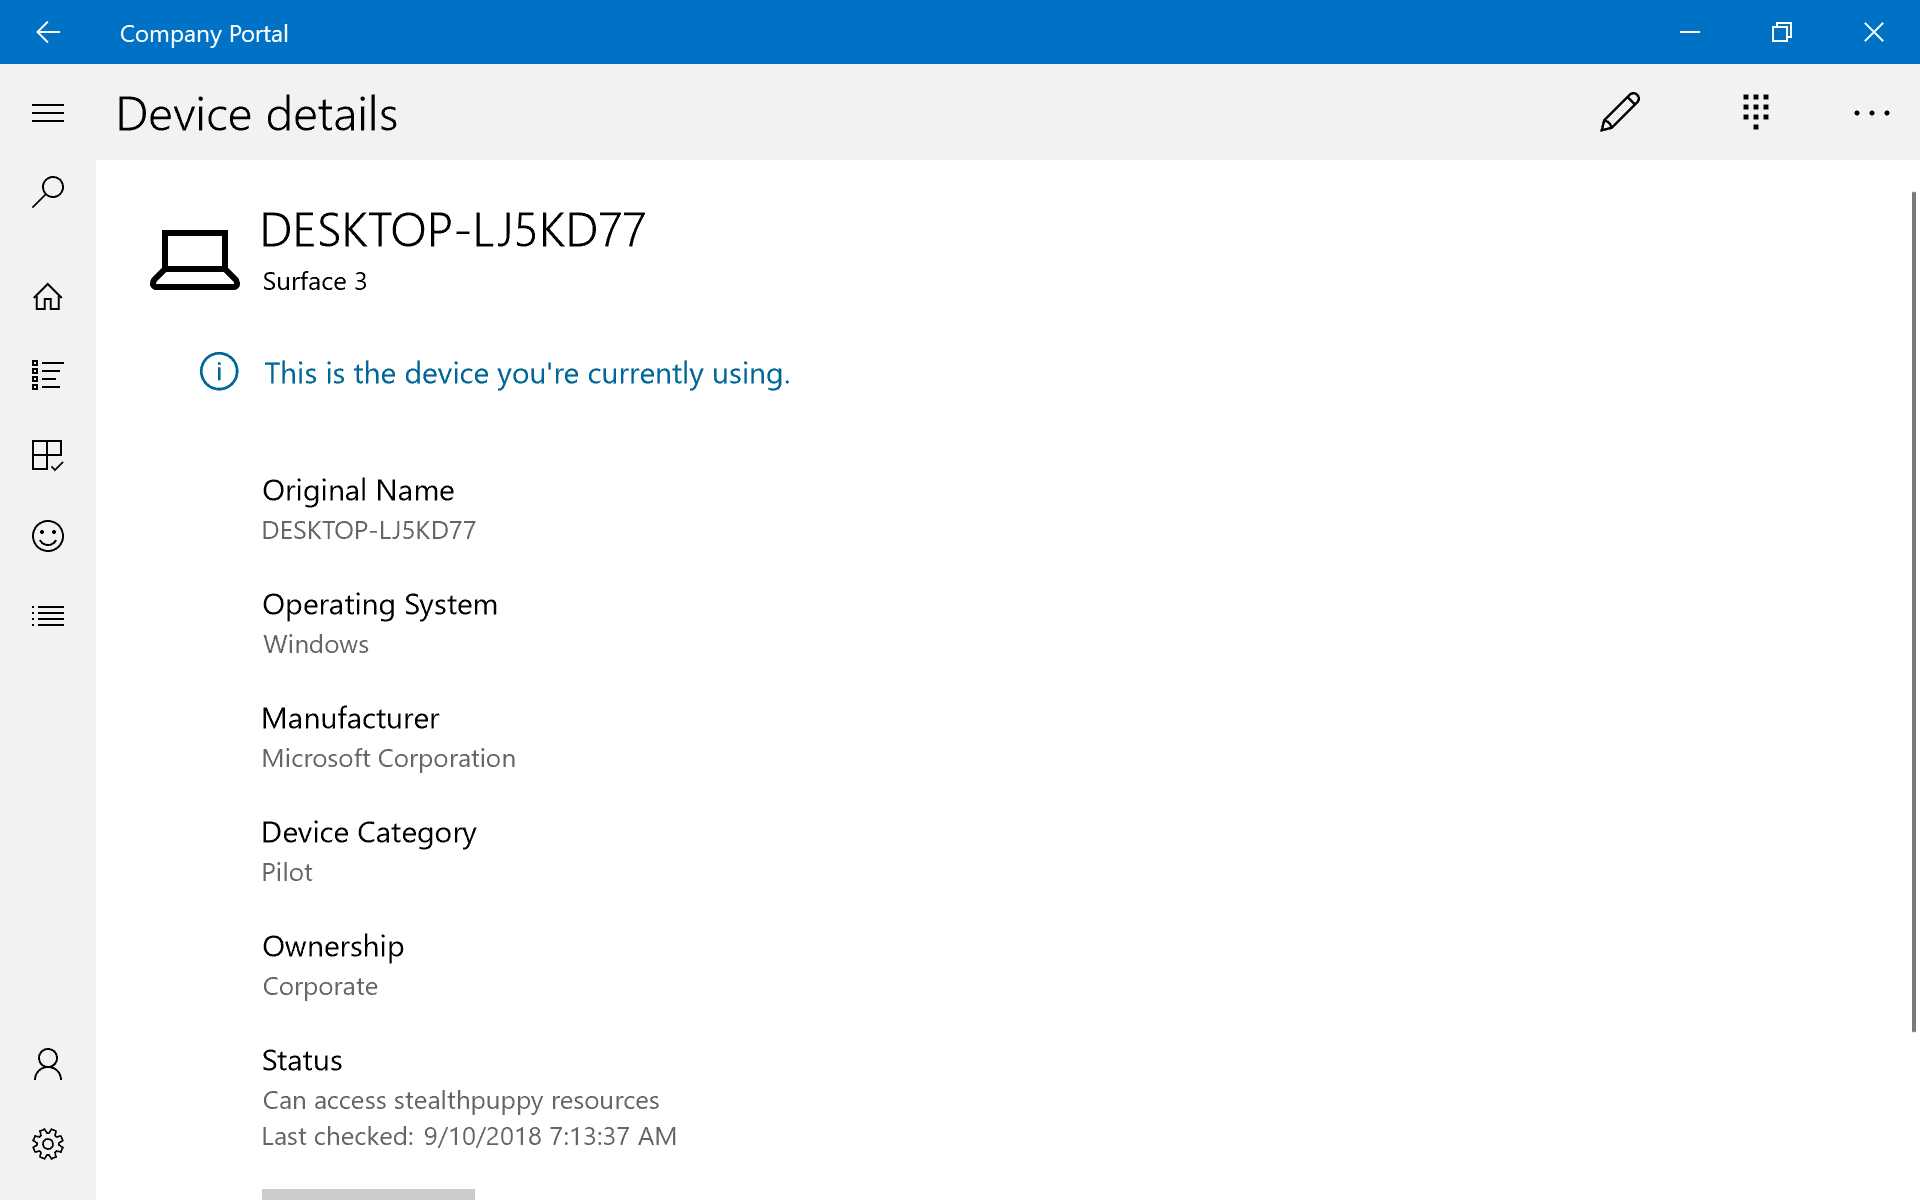 Device details in the Intune Company Portal